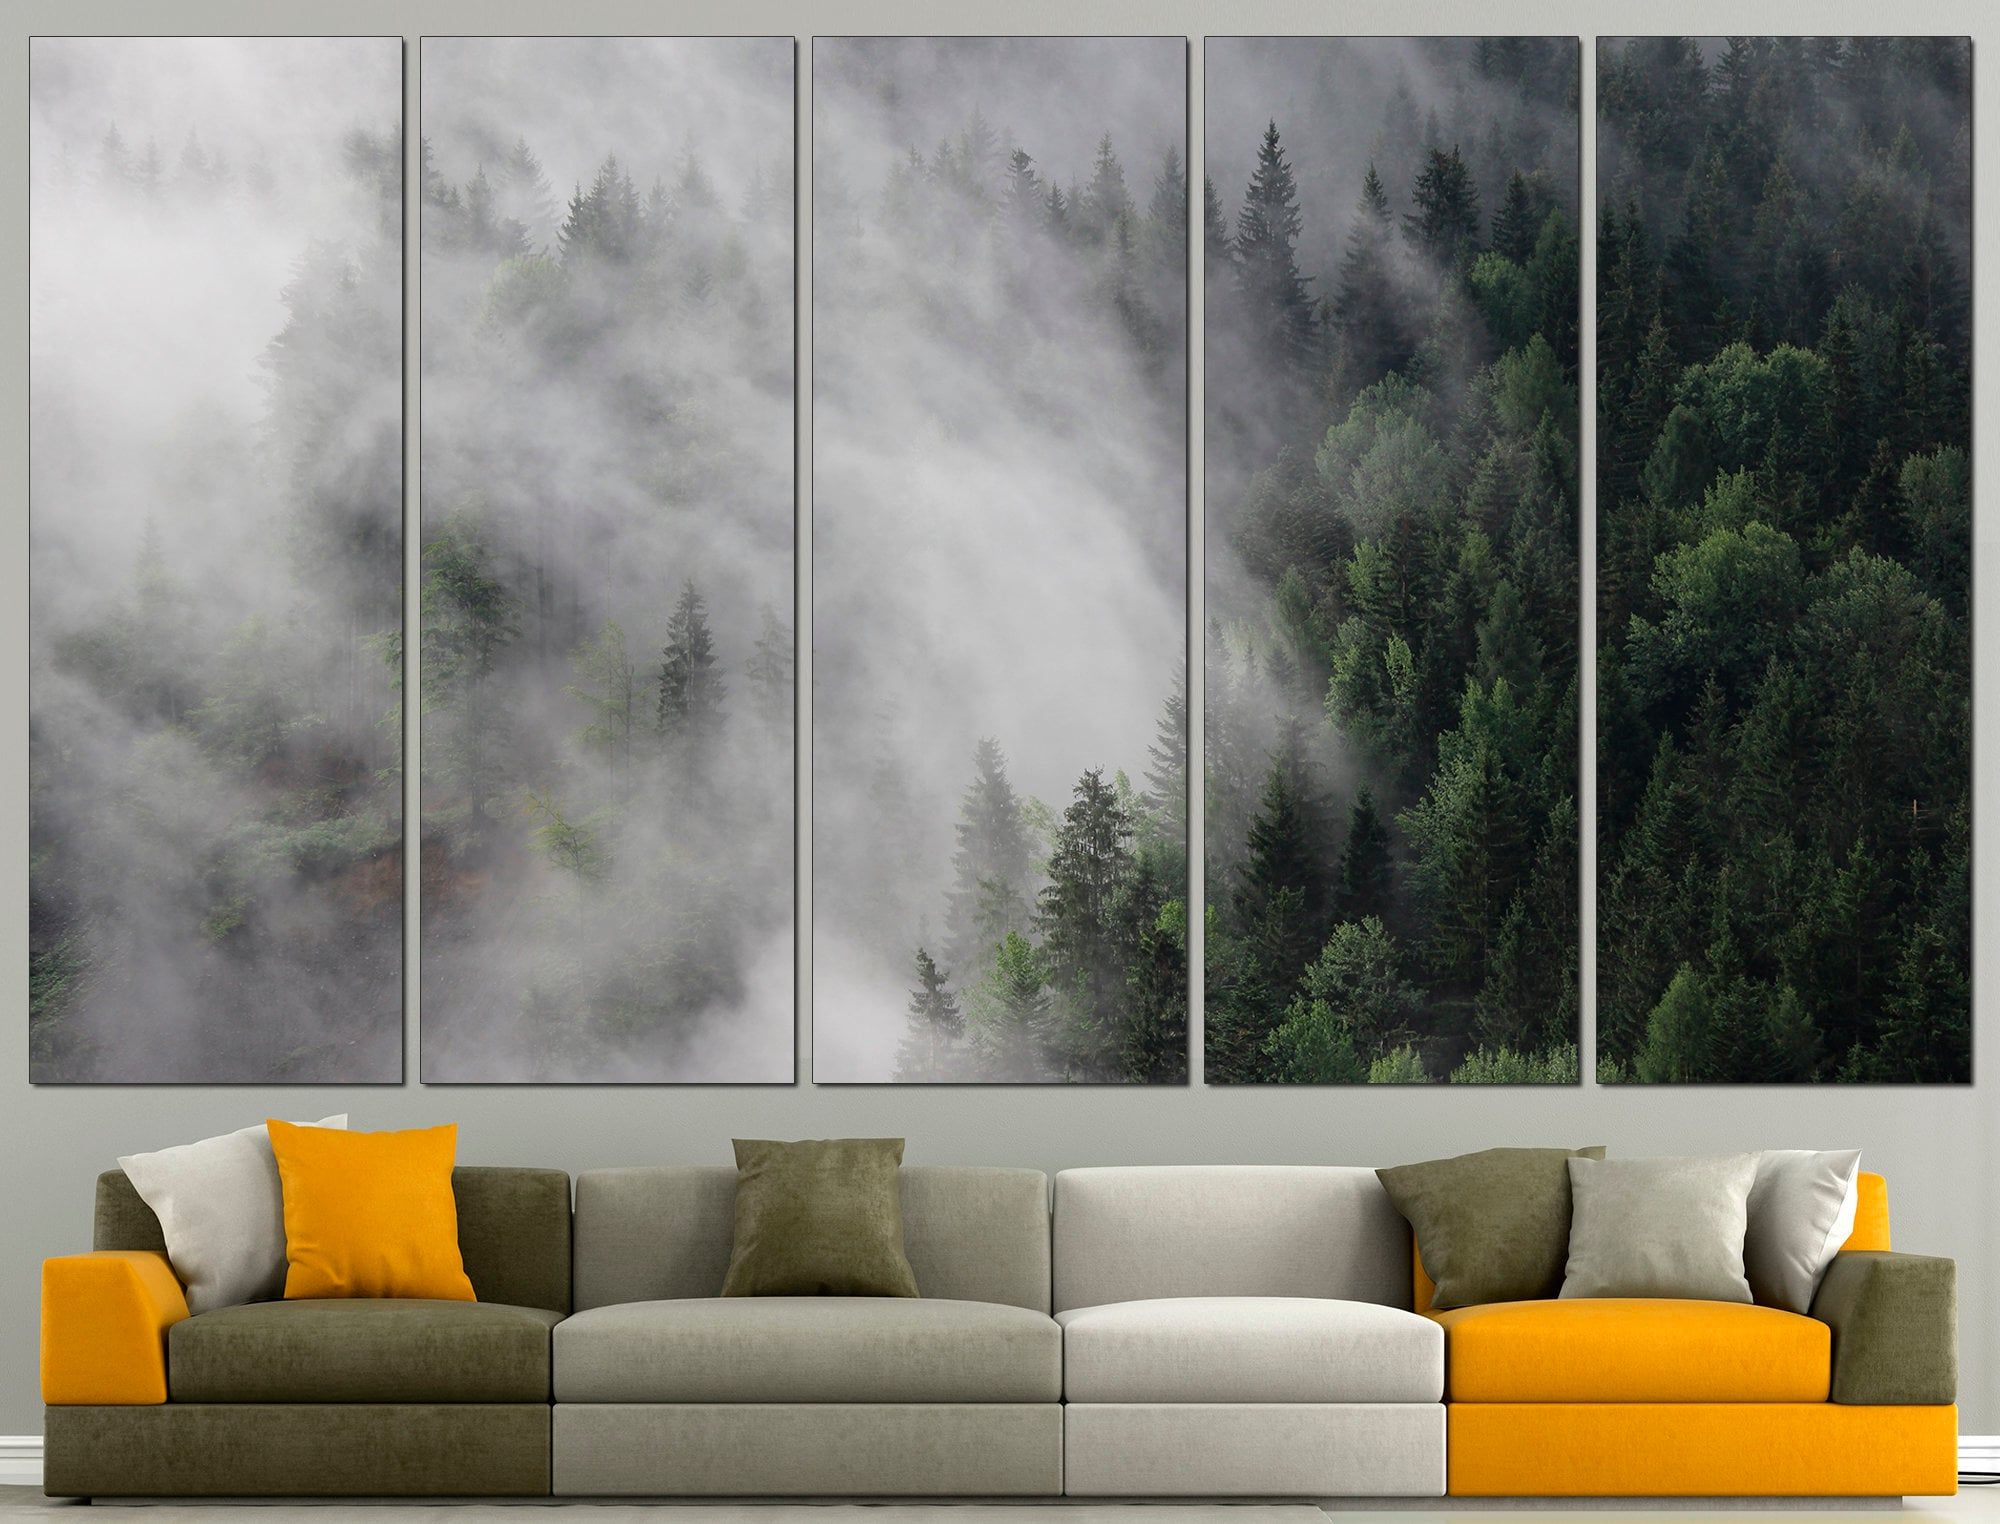 Popular Fog Wall Art Foggy Forest Art Forest Wall Art Fog Wall Decor – Etsy Within Mountains In The Fog Wall Art (View 7 of 15)